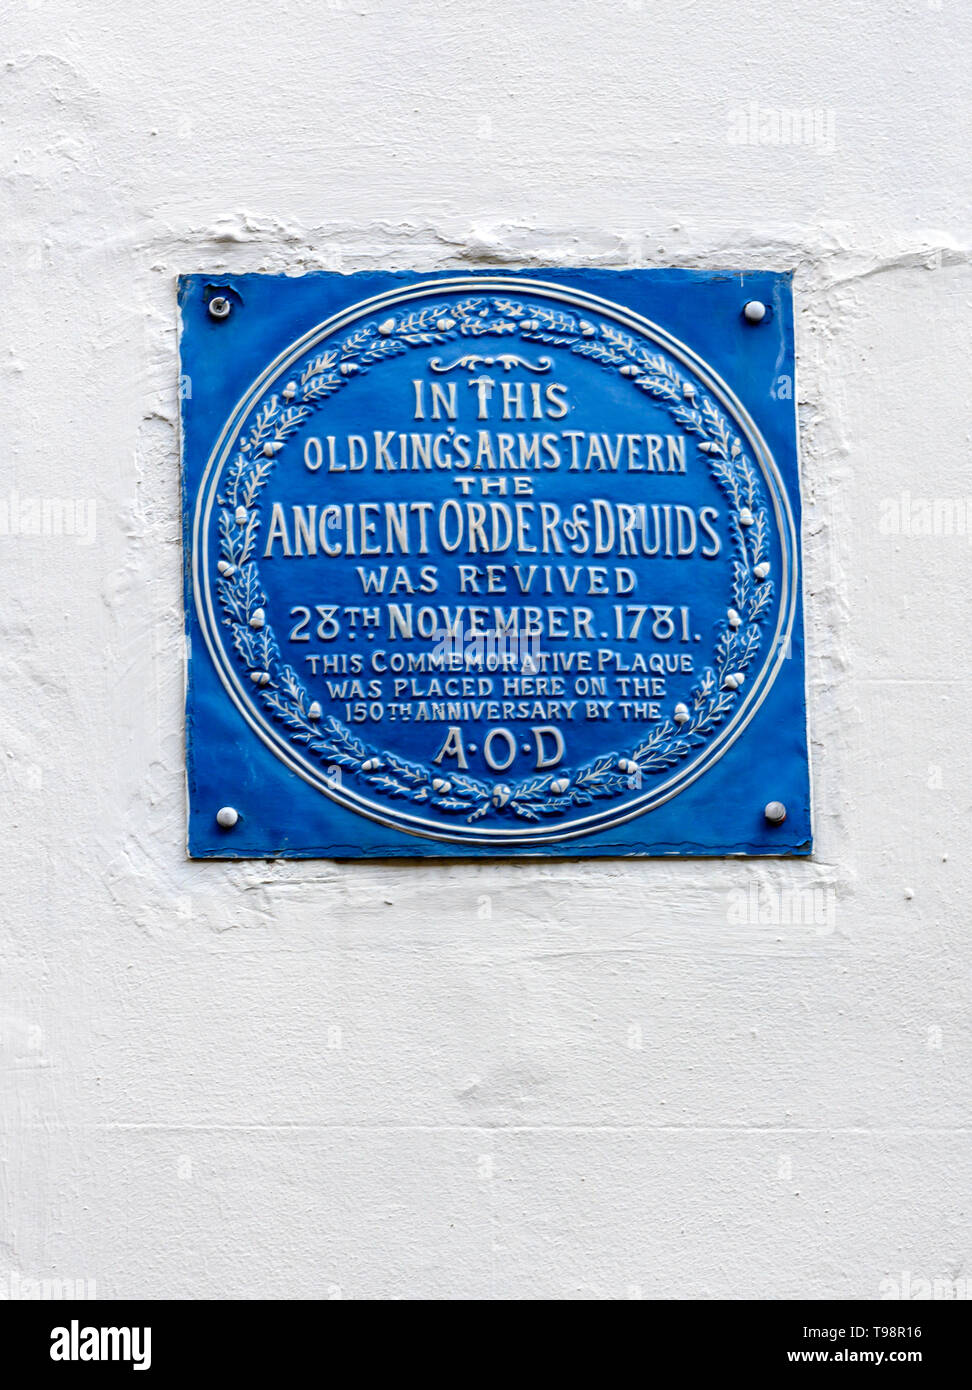 Plaque marking the tavern where the ancient order of druids was revived in 1781, Poland Street, Soho, London, England, UK. Stock Photo